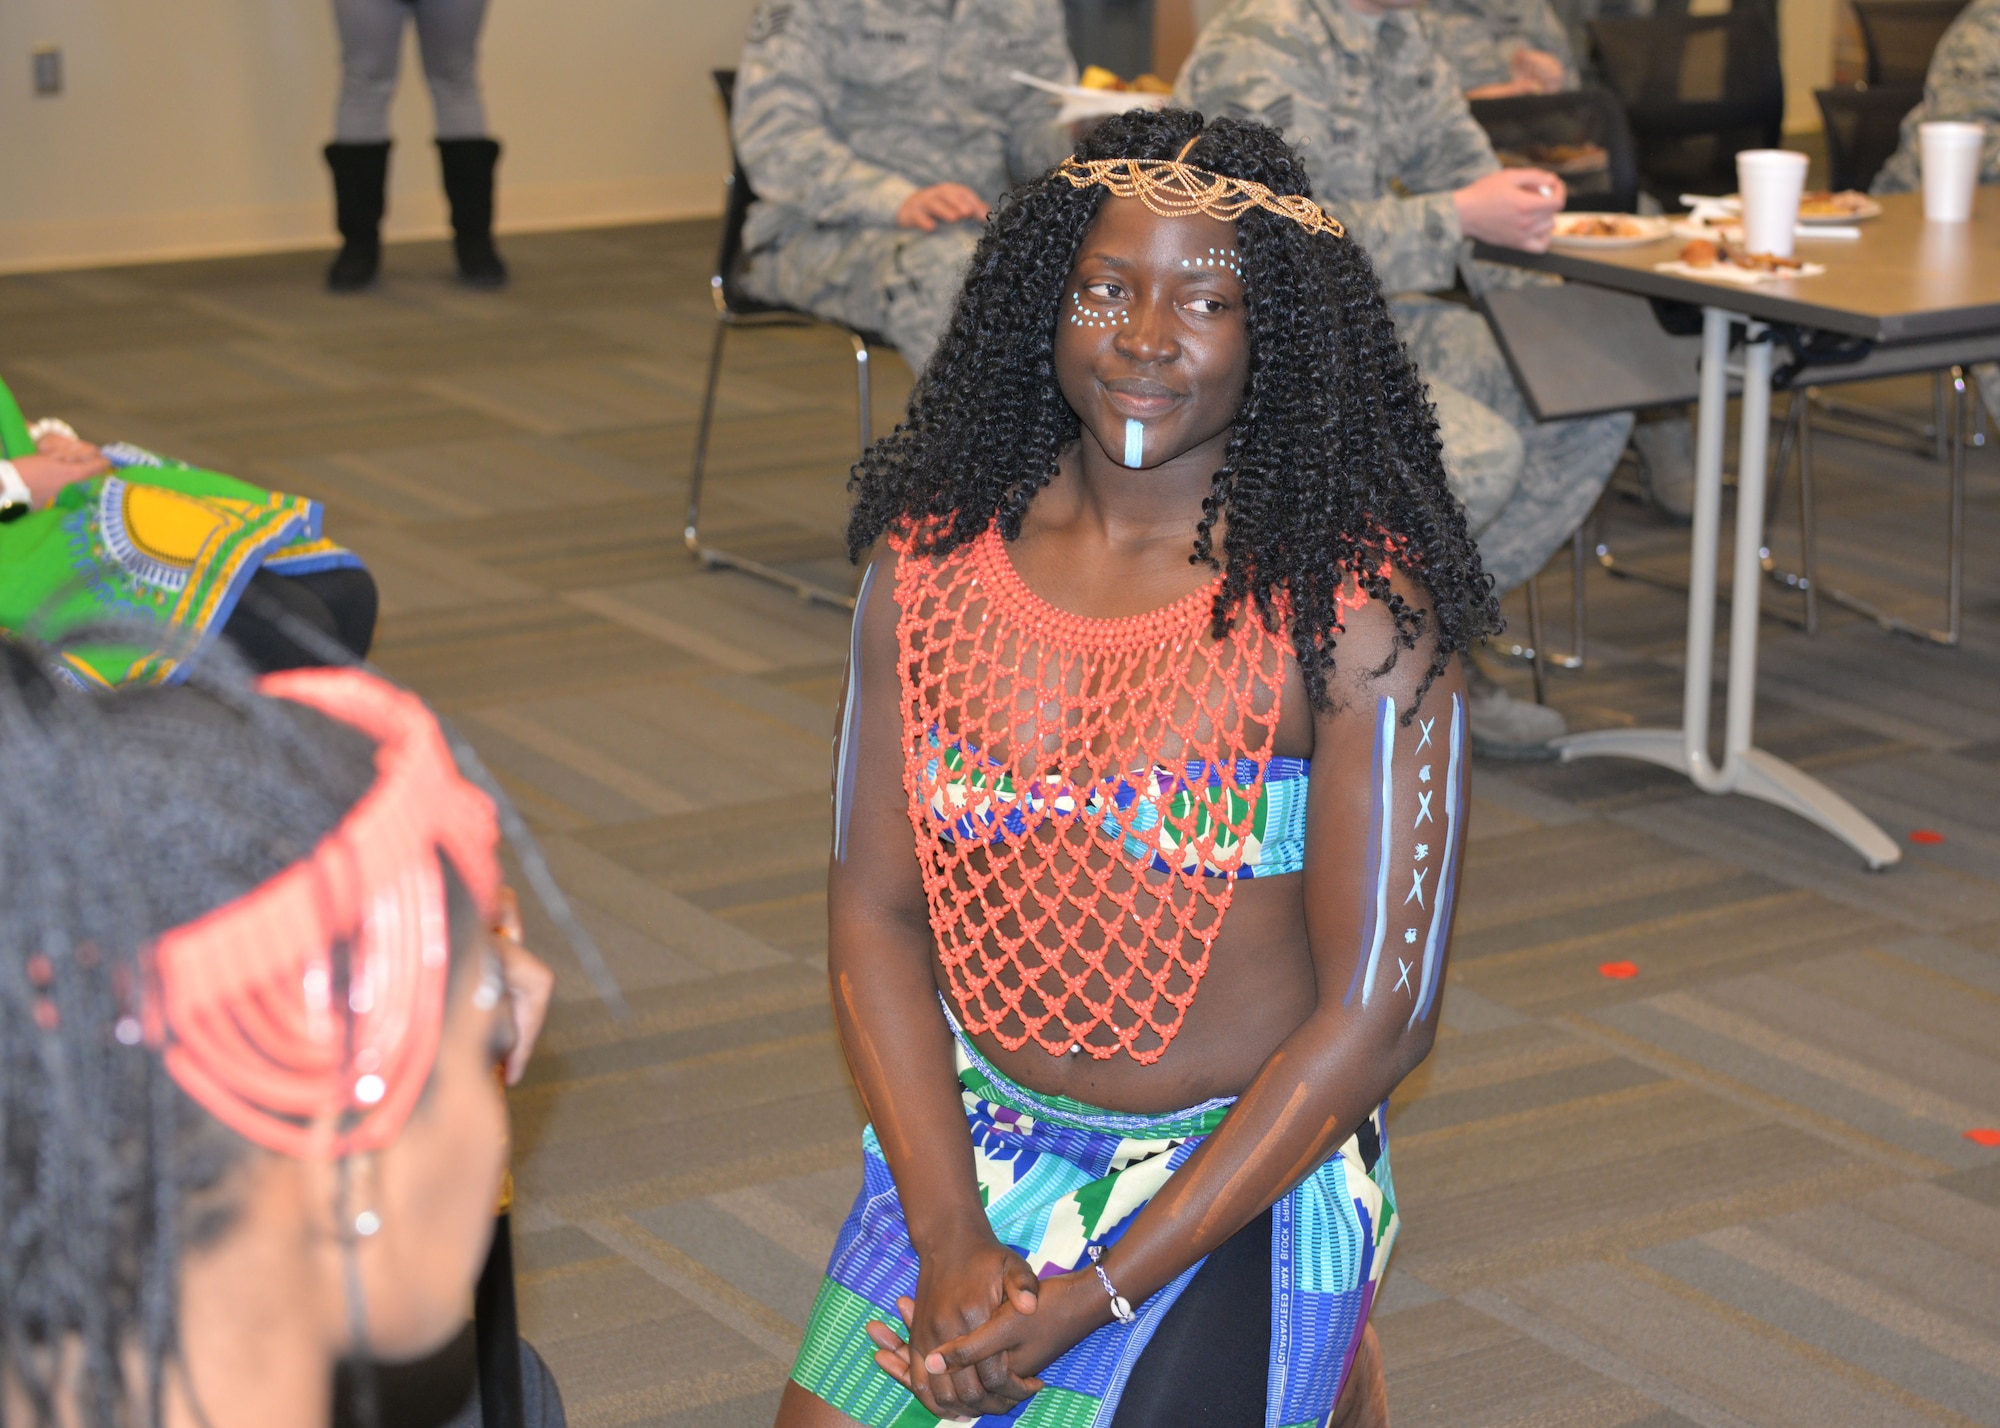 Airman 1st Class Georgette Ndamukong, a 28th Medical Group public health technician, plays the role of the princess during scene one of an African American History Month fashion show at Ellsworth Air Force Base, S.D., Feb. 23, 2018. Everyone greets the king and queen differently during a traditional West African wedding ceremony, and the fashion show educated participants of these African customs. (U.S. Air Force photo by Senior Airman Michella T. Stowers)